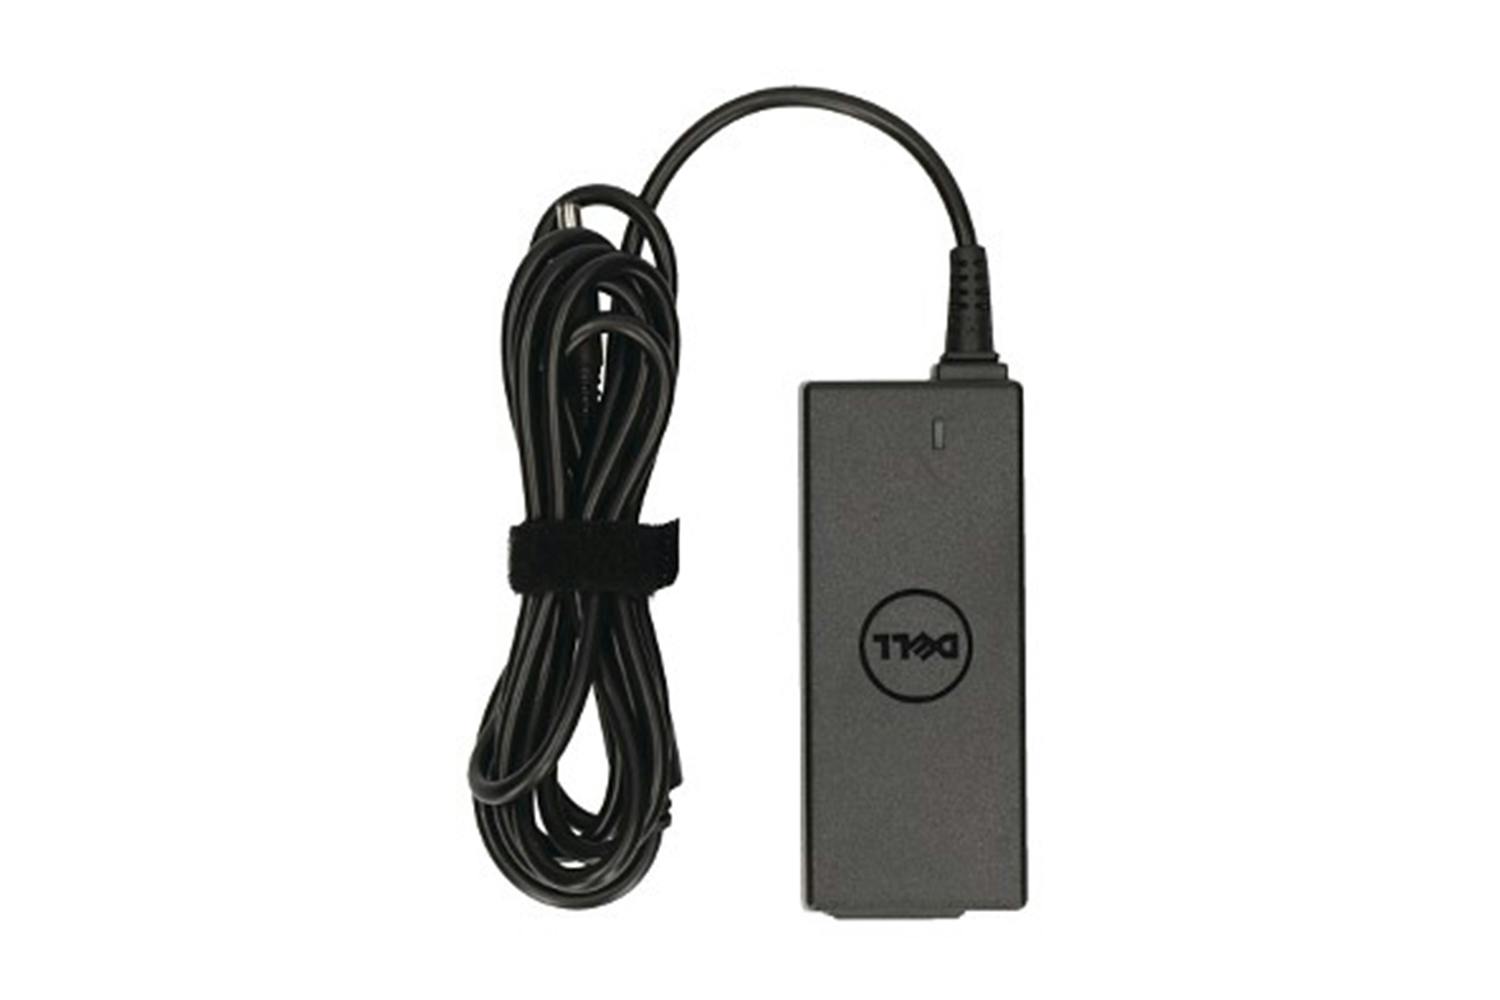 Dell AC Adapter 19.5V 2.31A 45W